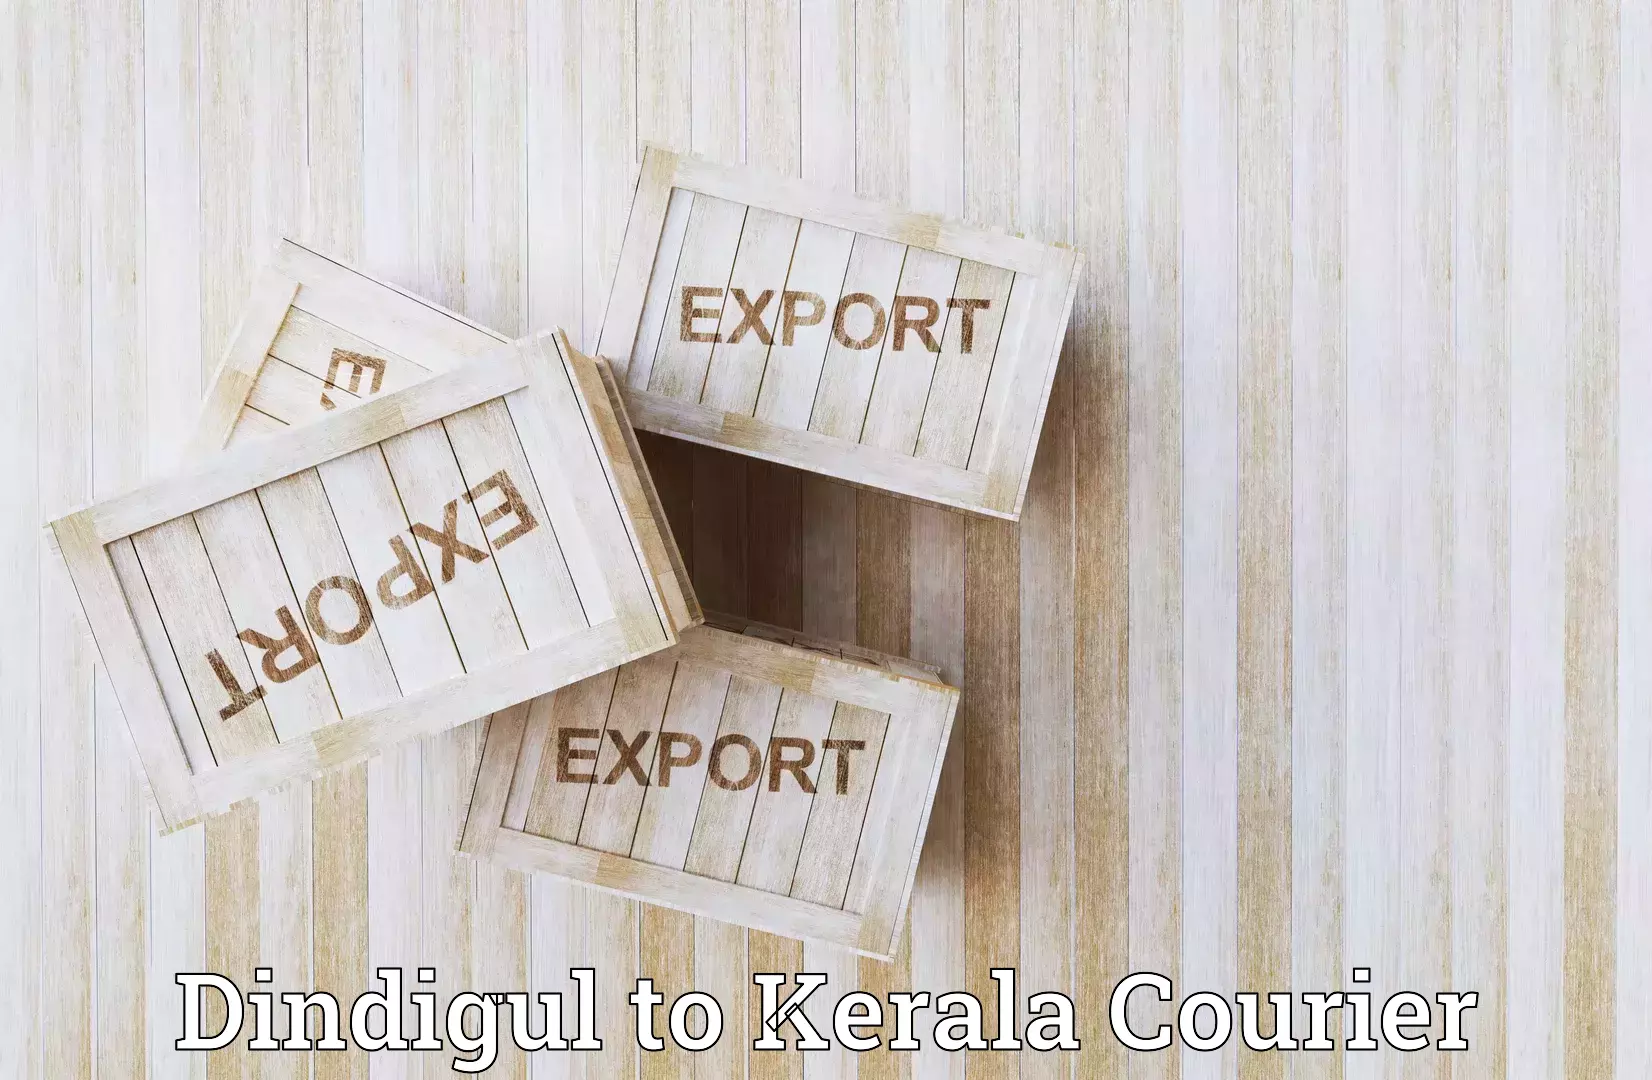 Next-day freight services Dindigul to Cochin Port Kochi